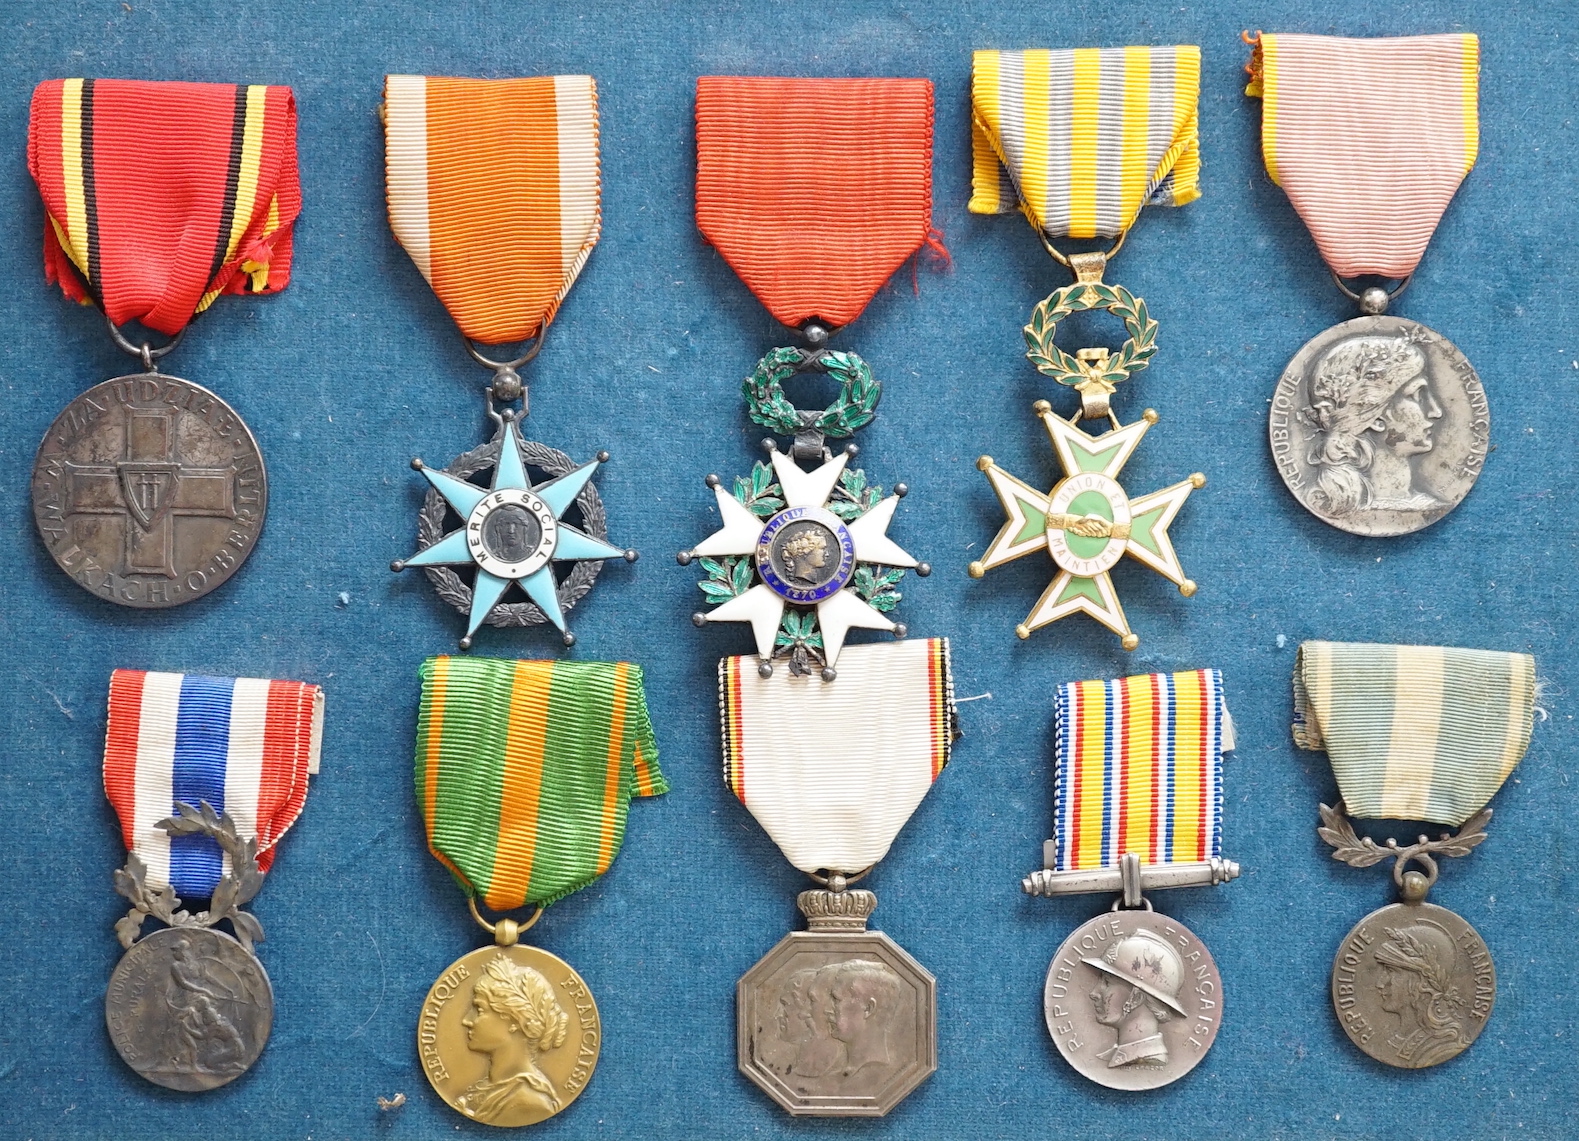 Eighteen French medals, including The War Cross, TOE French Legion Cross, Medal of Honour, Croix